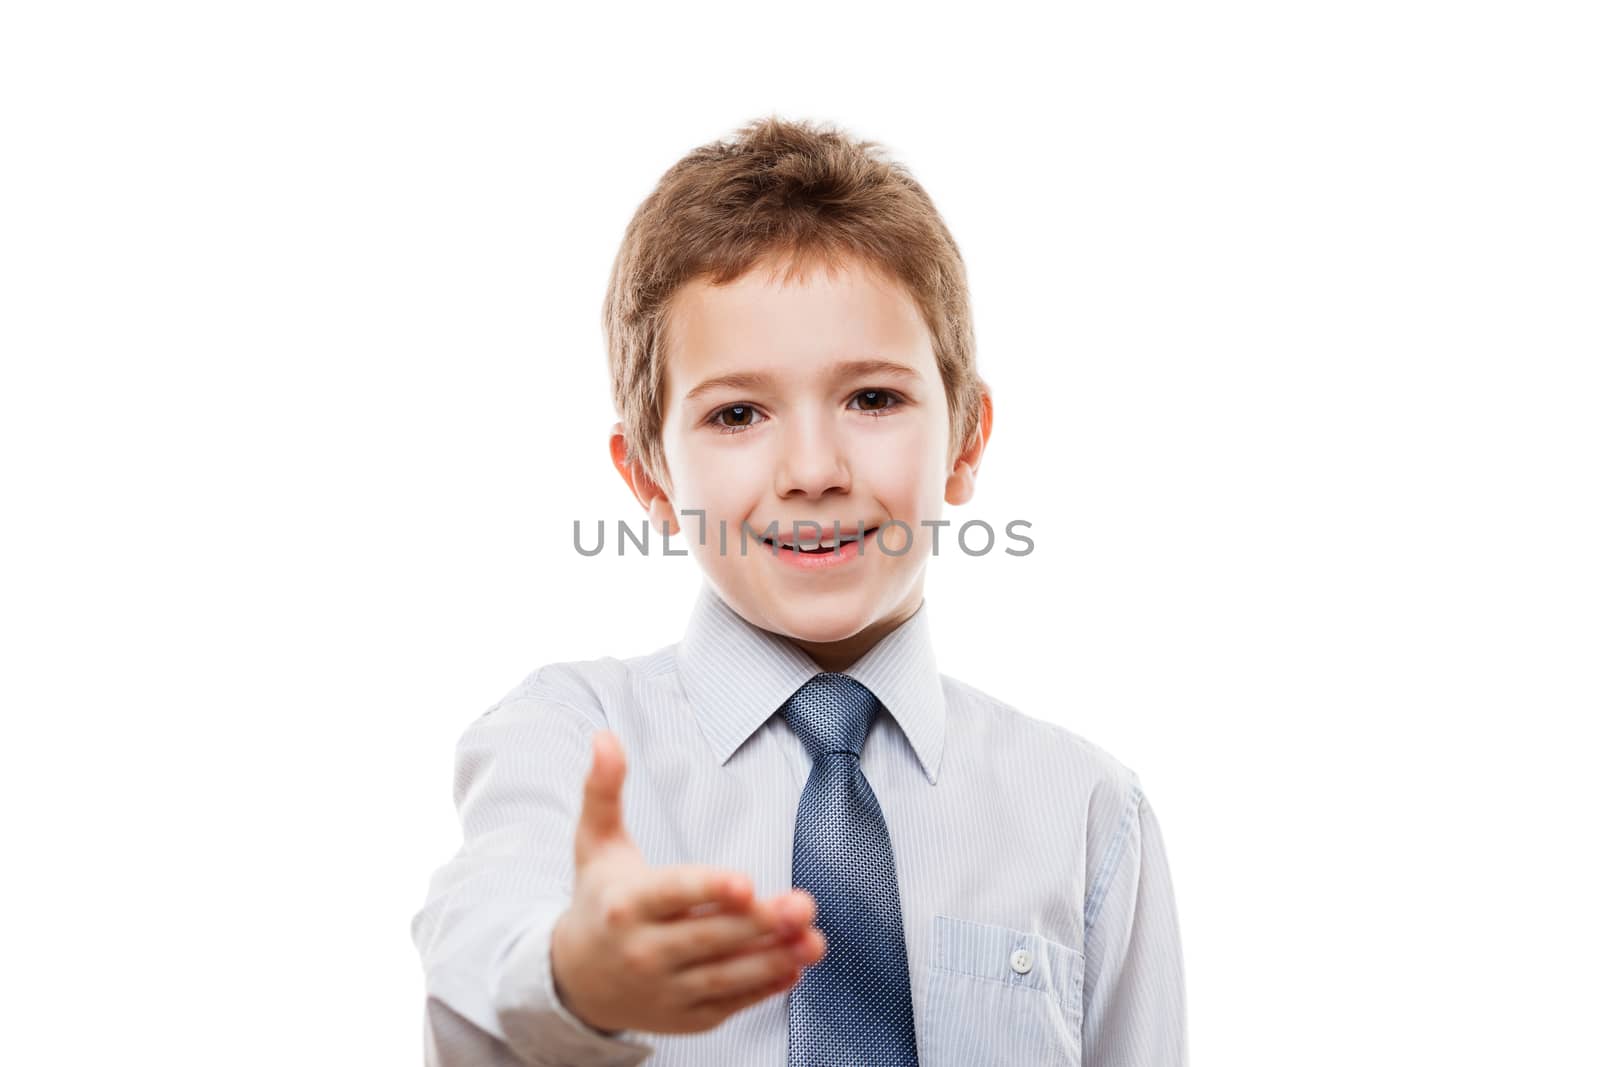 Little smiling child boy gesturing hand greeting or meeting handshake white isolated